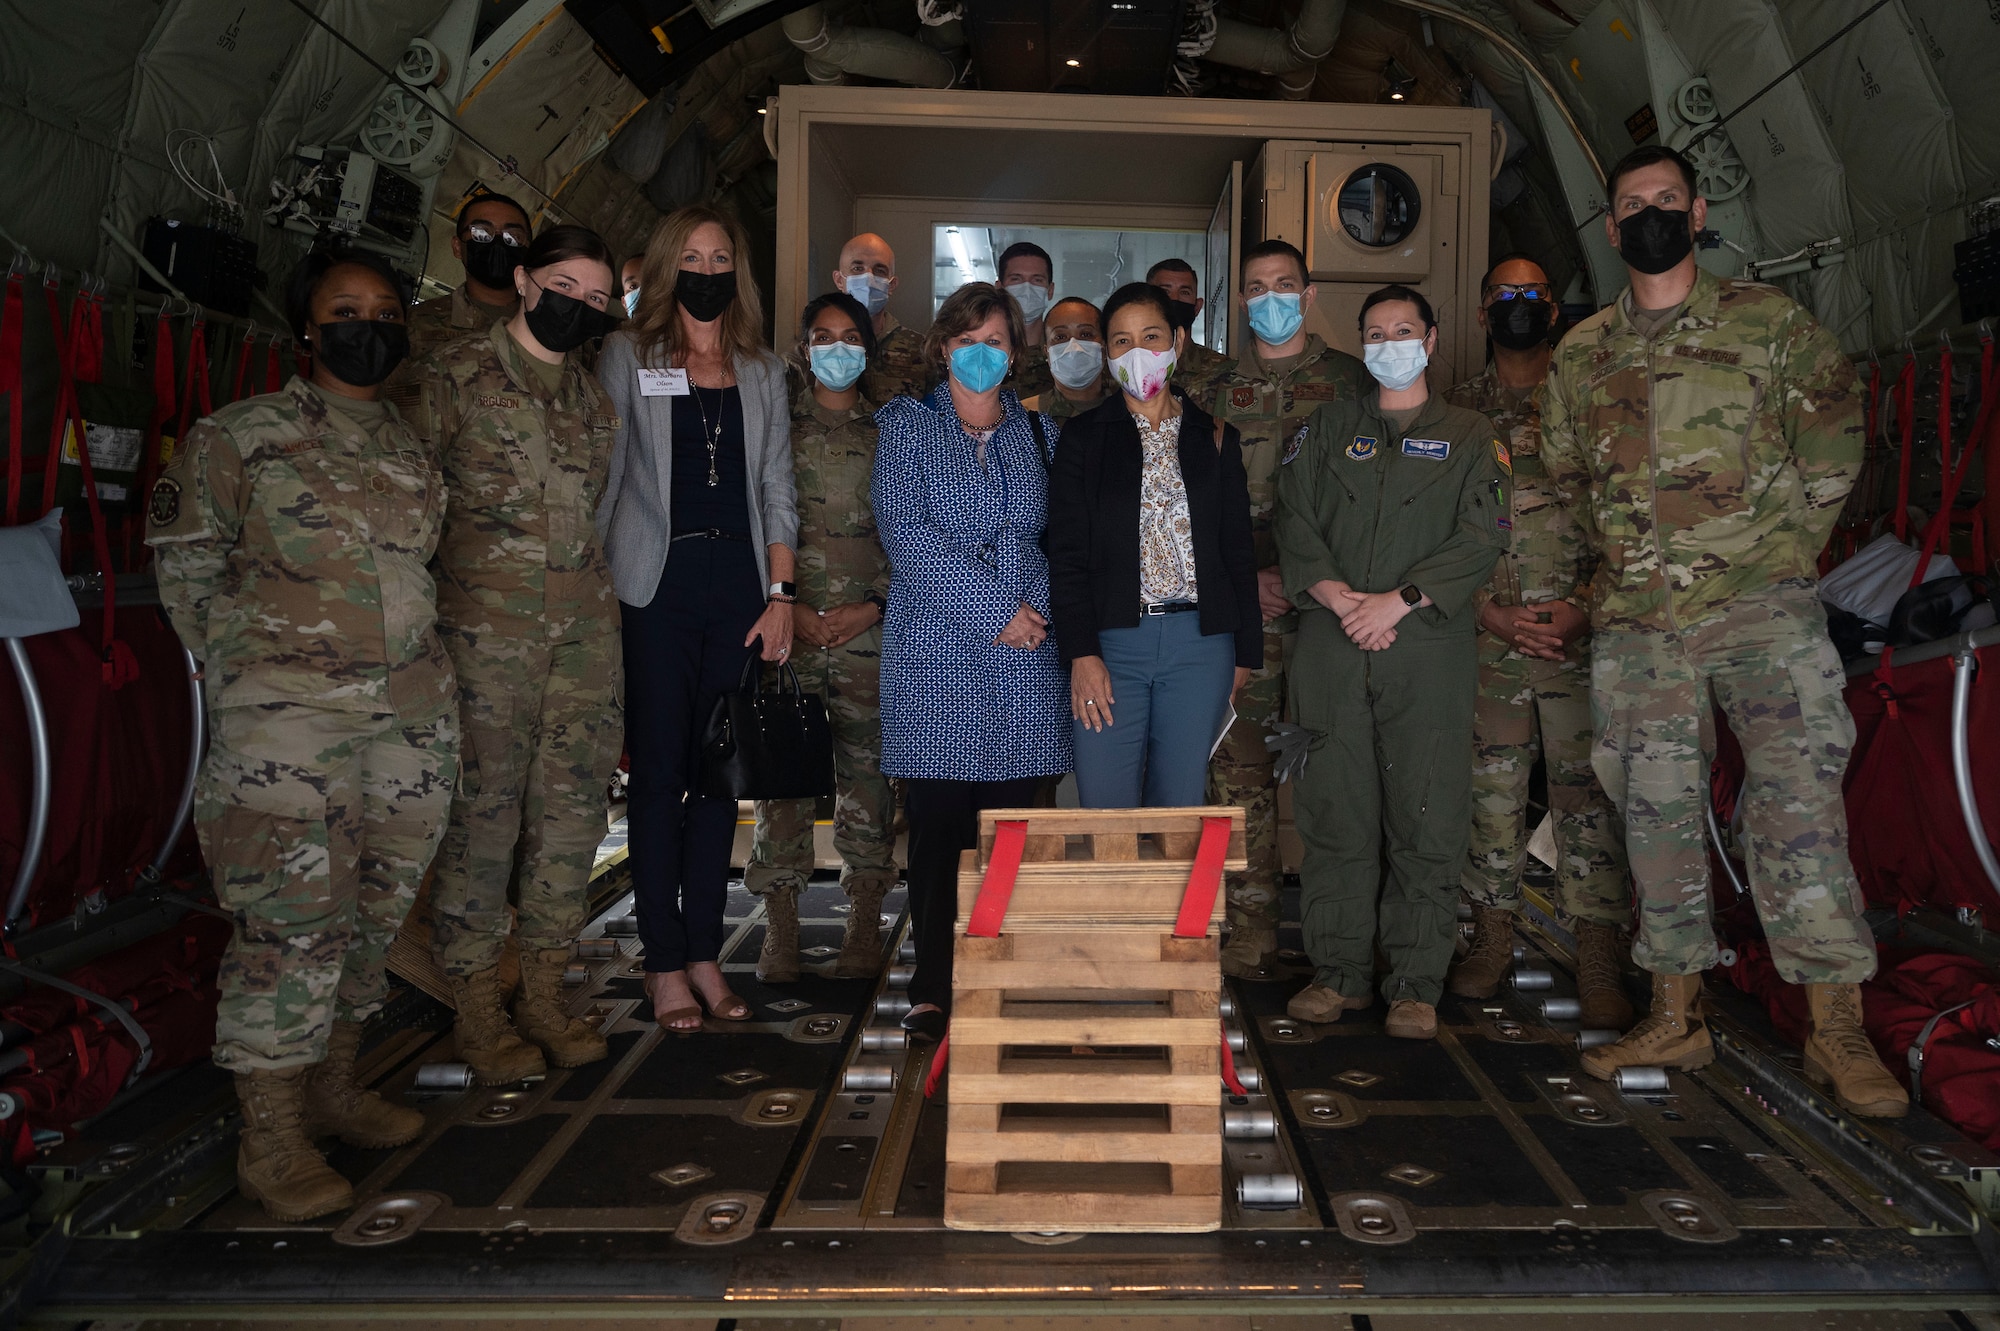 Mrs. Sharene Brown, middle right, takes a group photo with Airmen assigned to the 86th Aeromedical Evacuation Squadron at Ramstein Air Base, Germany, July, 14, 2021. Mrs. Brown was briefed on the 86th AES’s COVID-19 patient transport procedures